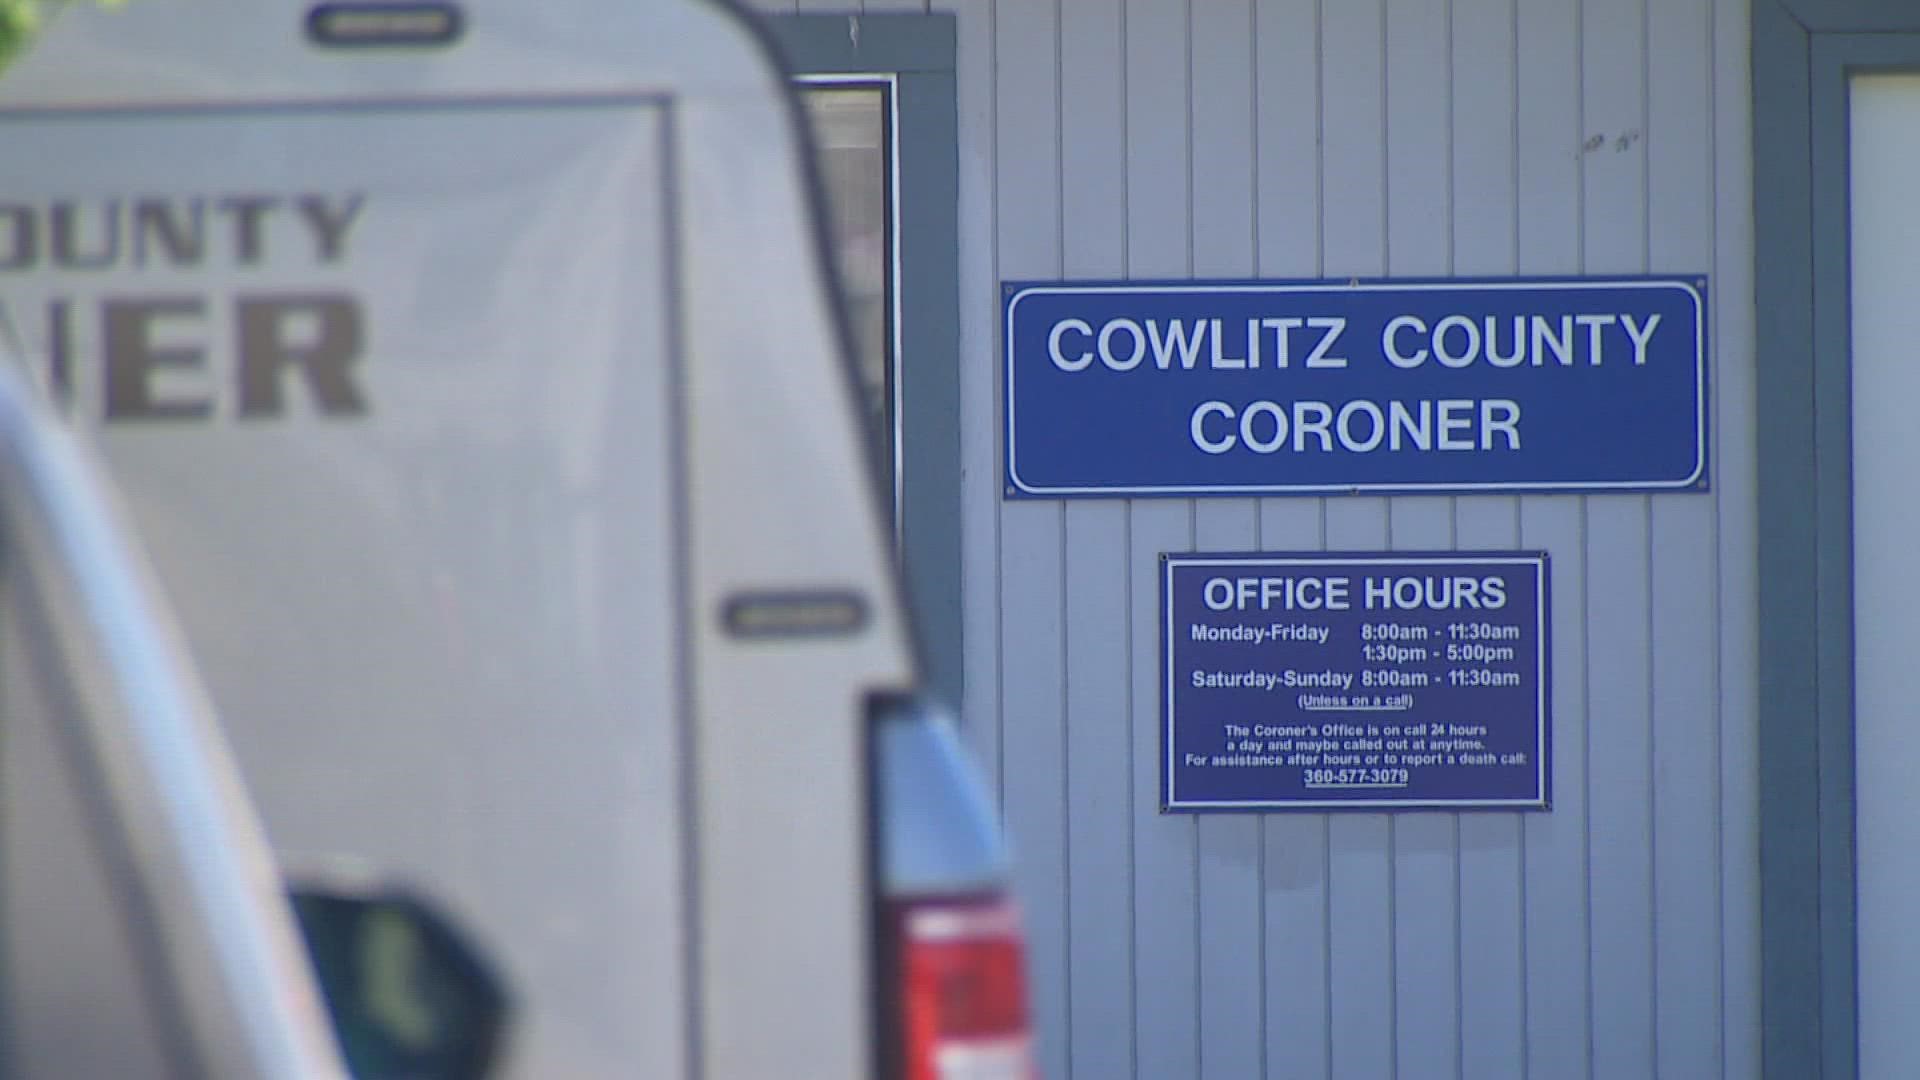 The Cowlitz County coroner said the country morgue and funeral homes are over capacity and staff are “being creative” to maintain cold storage.